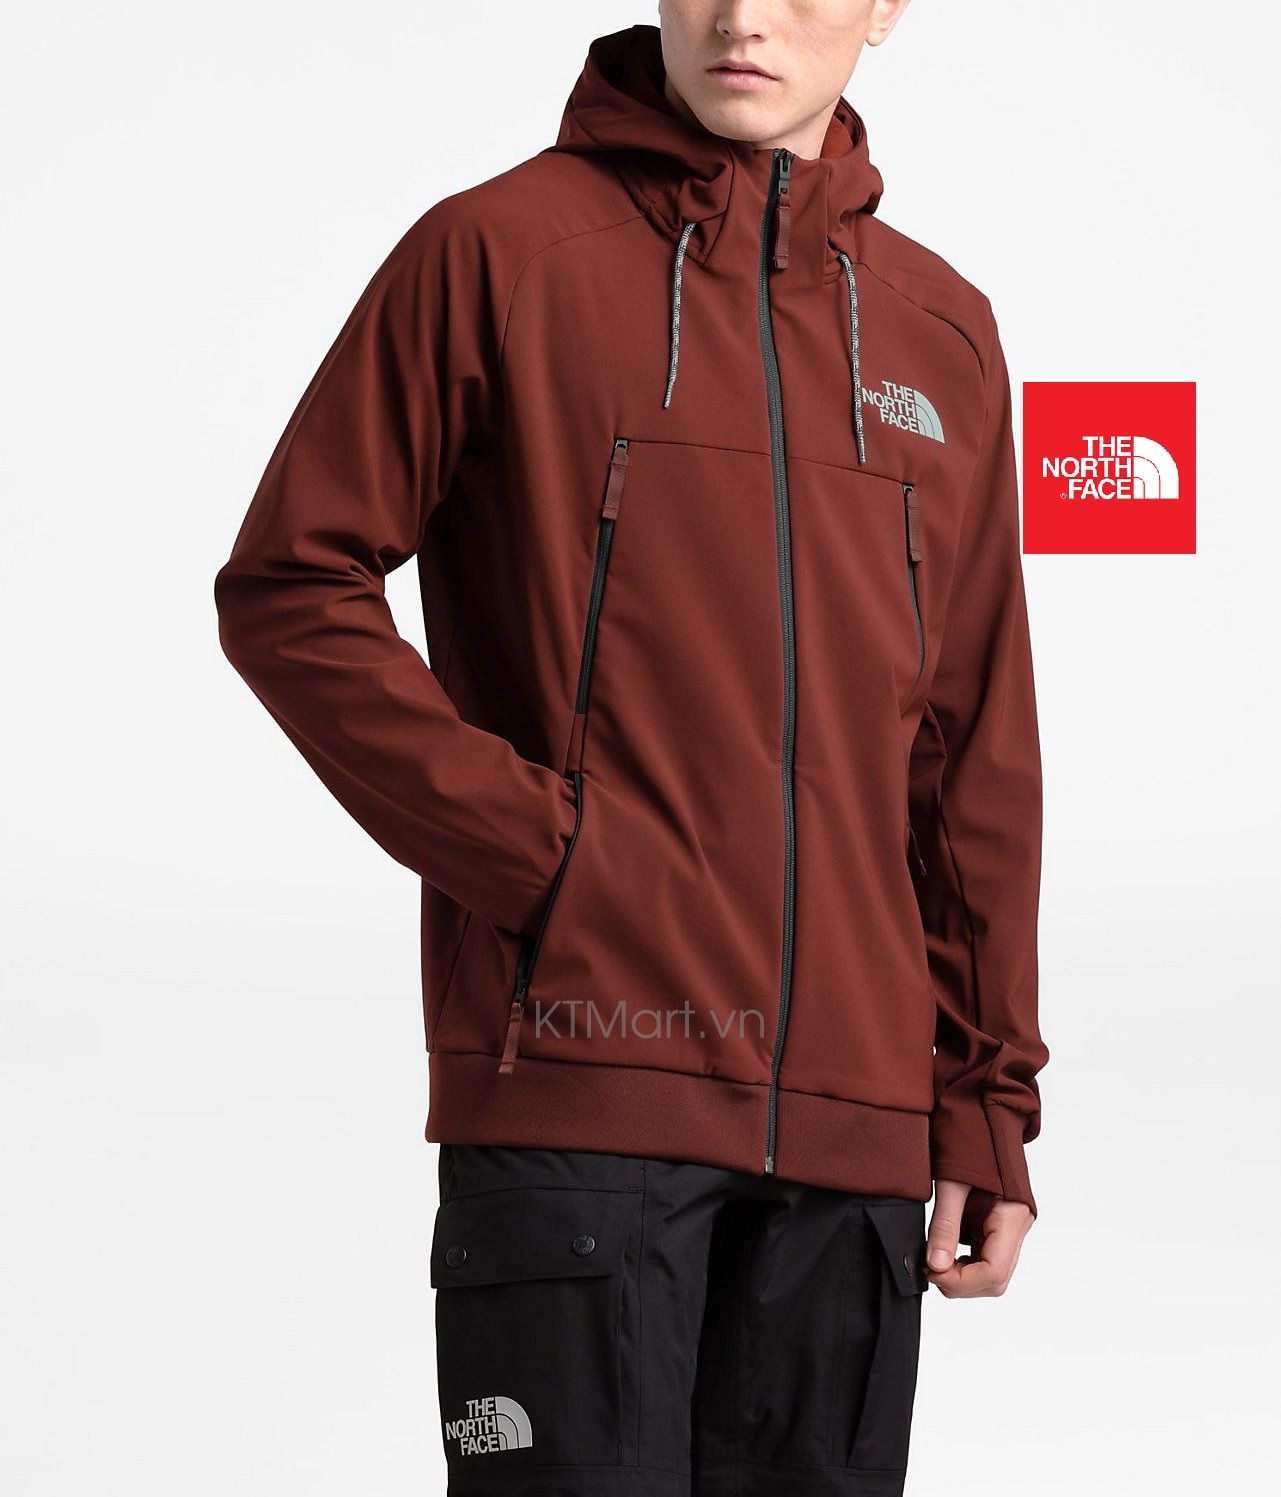 The North Face Men’s Tekno Hoodie Full Zip NF0A3LWP The North Face size M